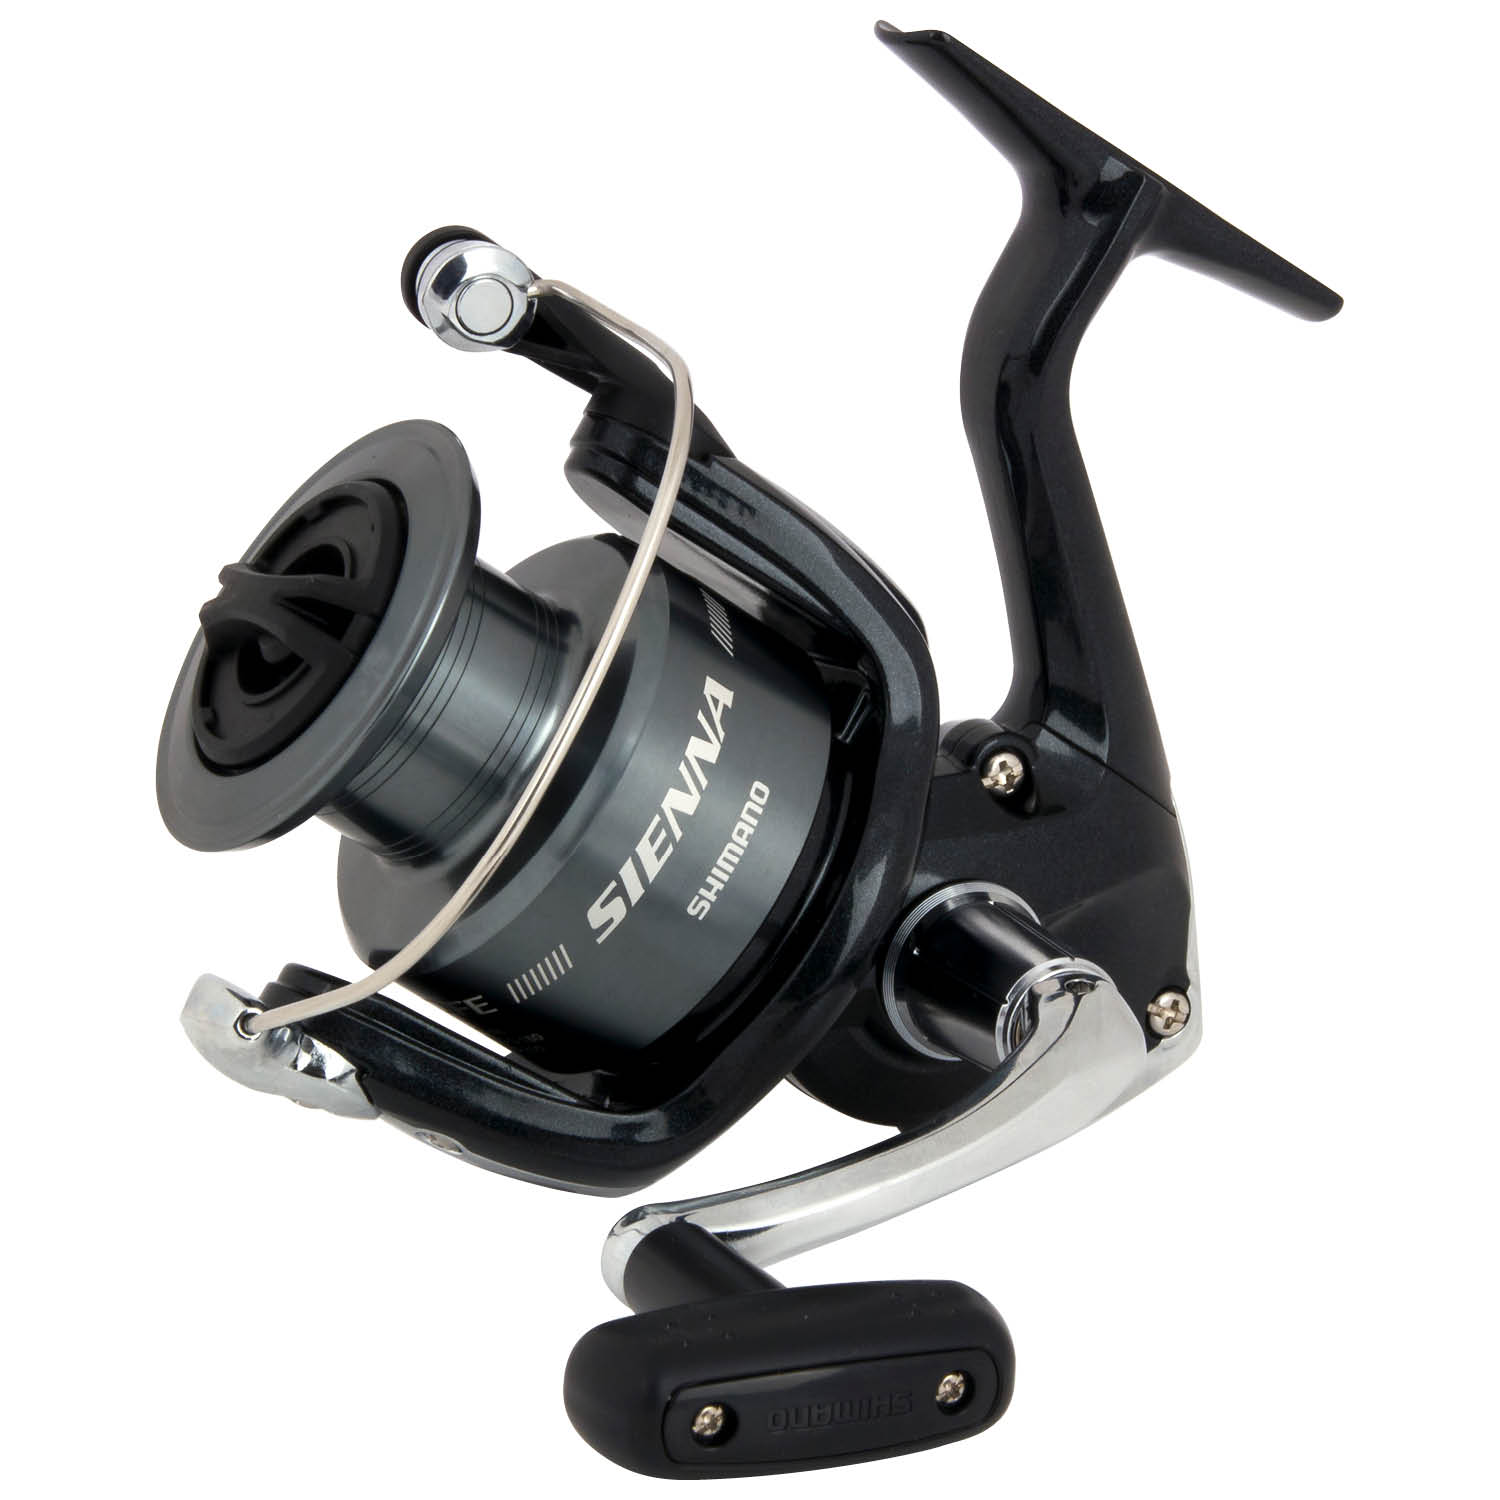 The Shimano Sienna Fe Series: Do You Really Get What You Pay For